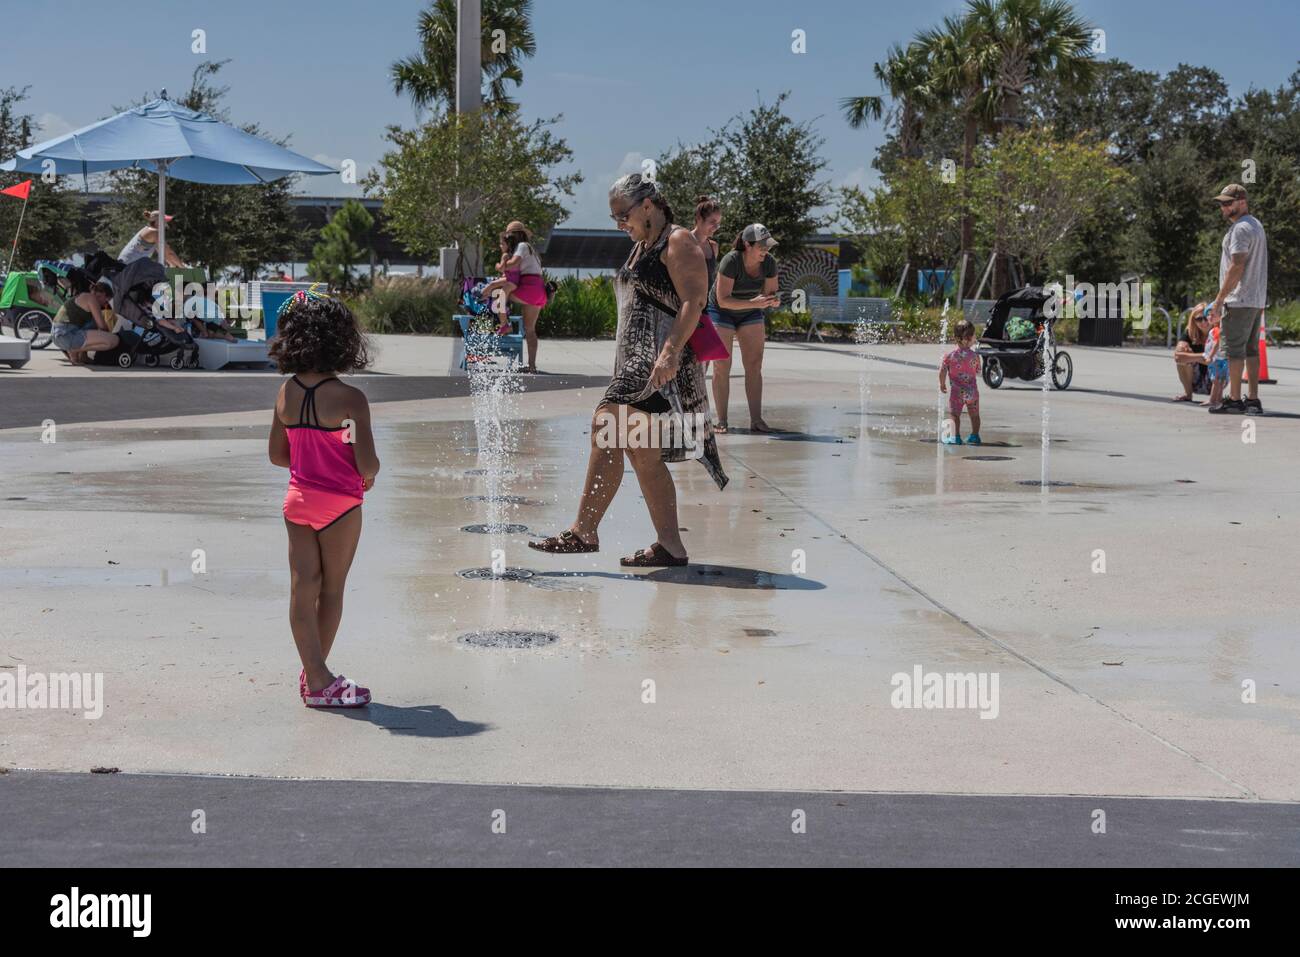 Tourist enjoying the water sprinklers at St. Petersburg's new Pier district. St. Petersburg, Florida, USA Stock Photo